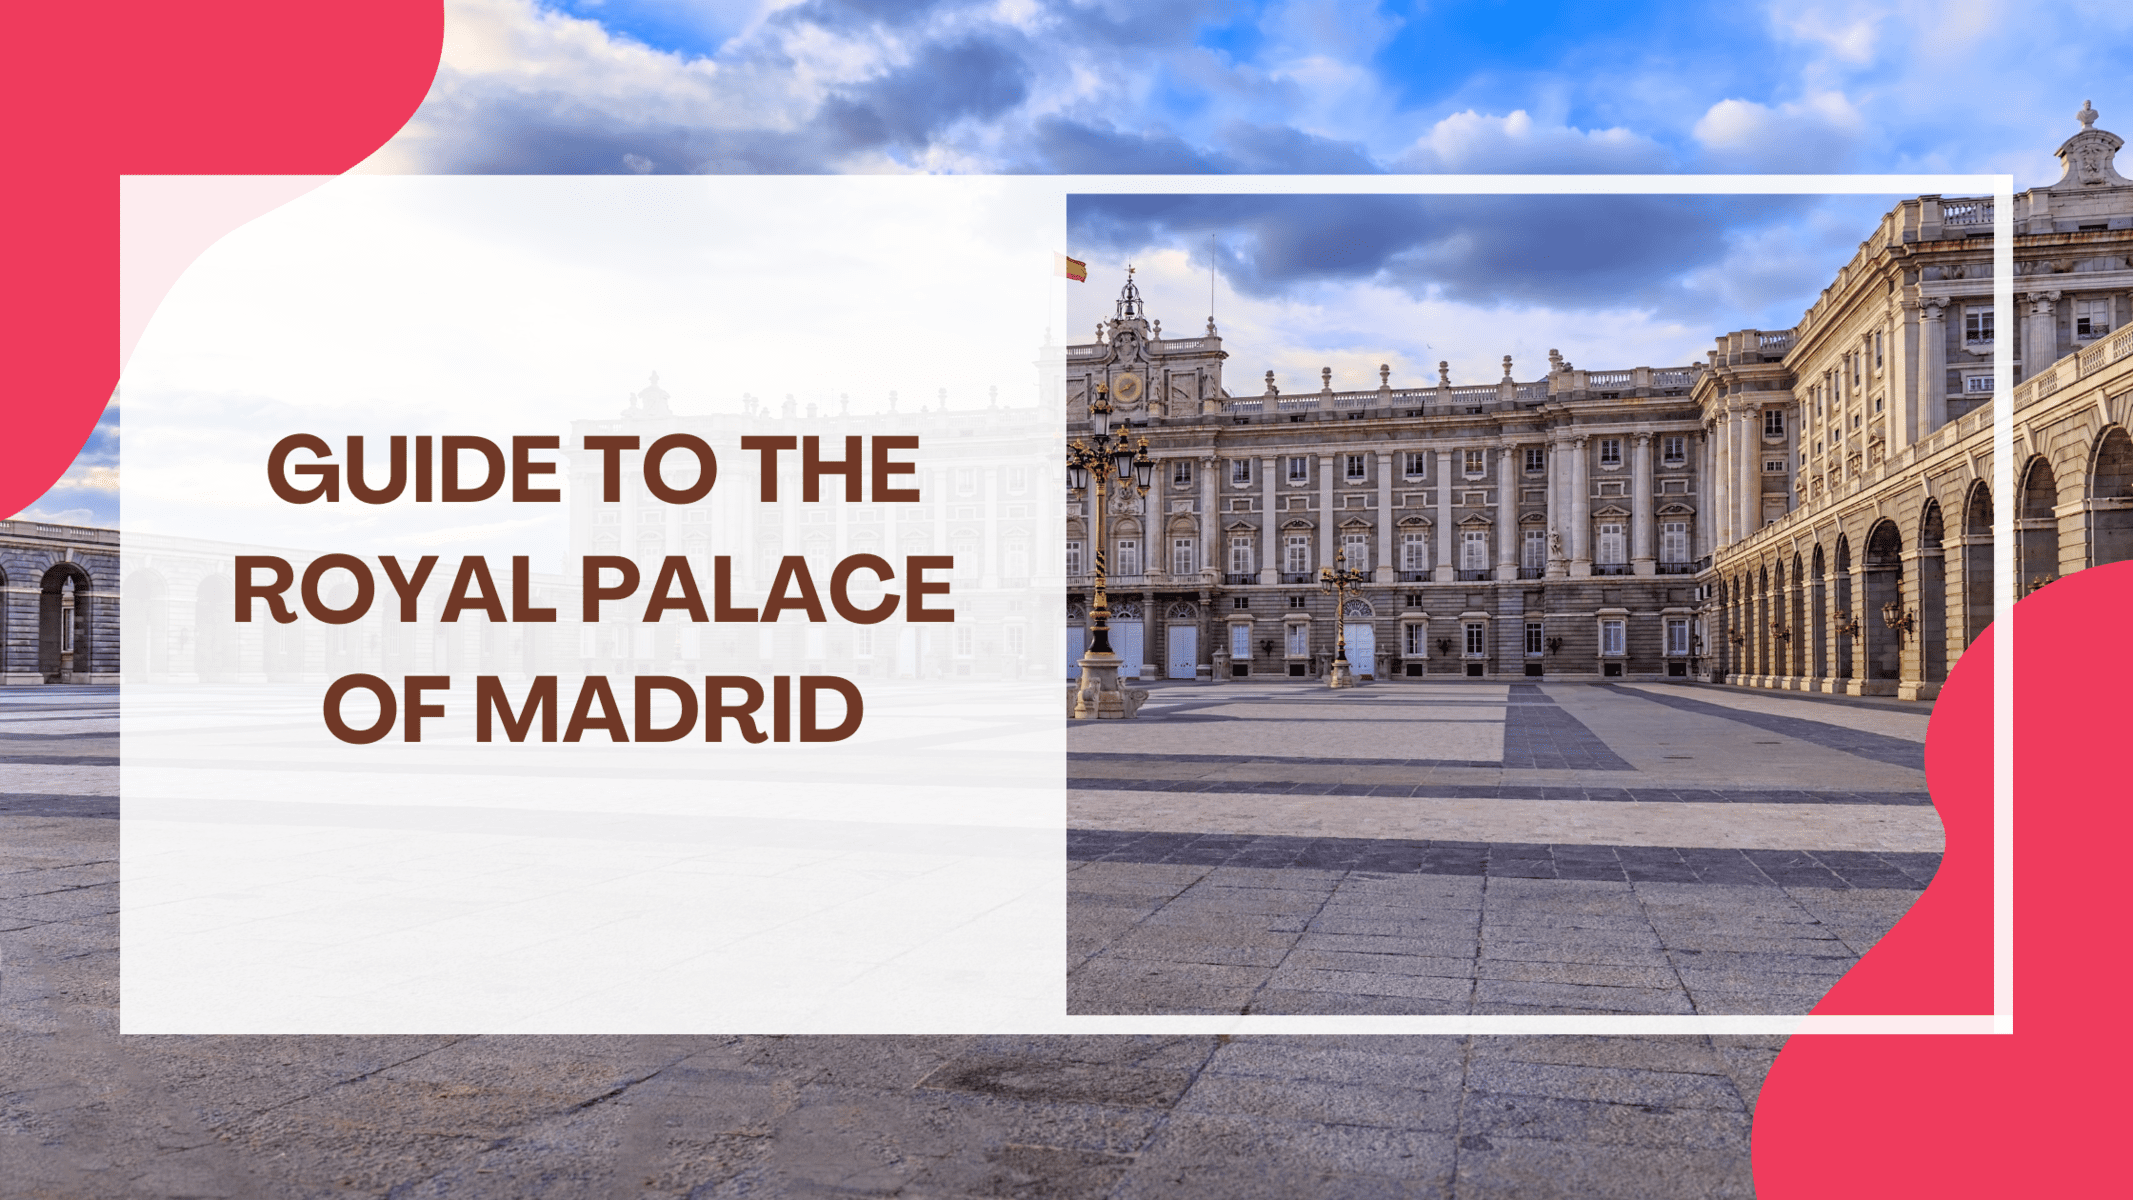 Guide to the Royal Palace of Madrid